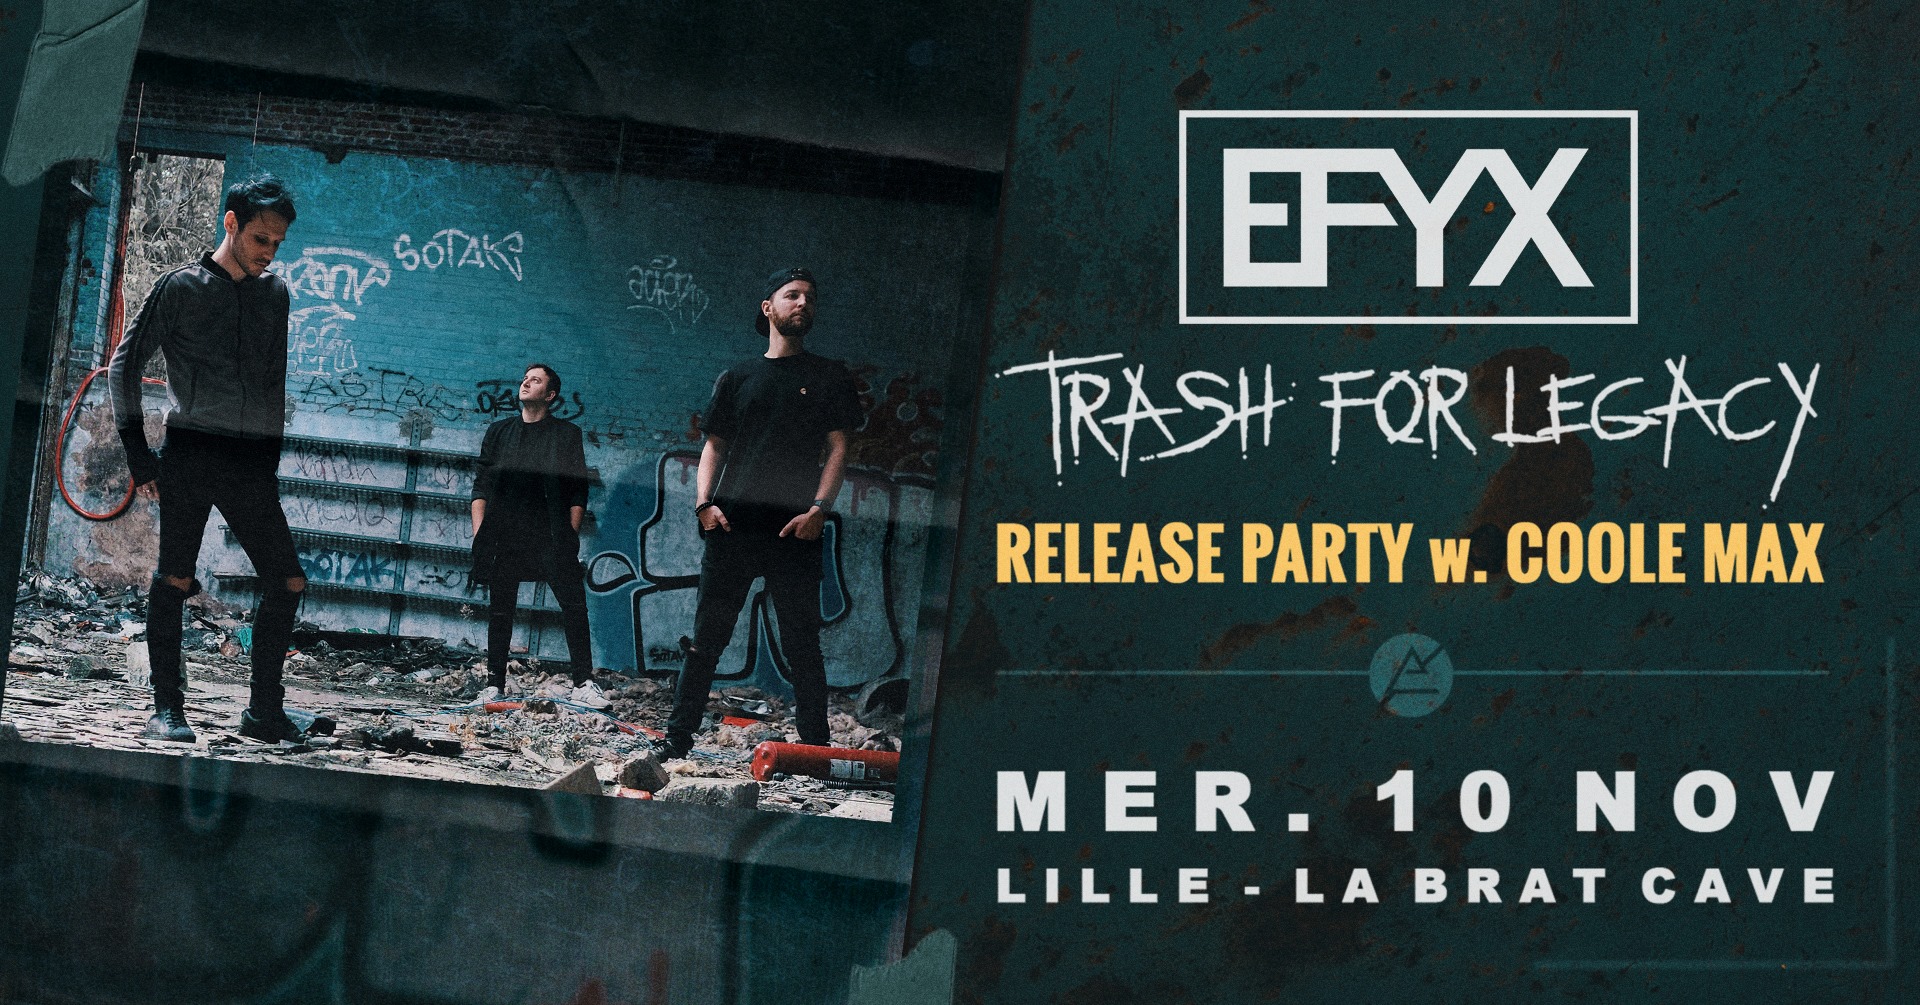 EFYX ● "Trash for Legacy" Release Party w. COOLE MAX